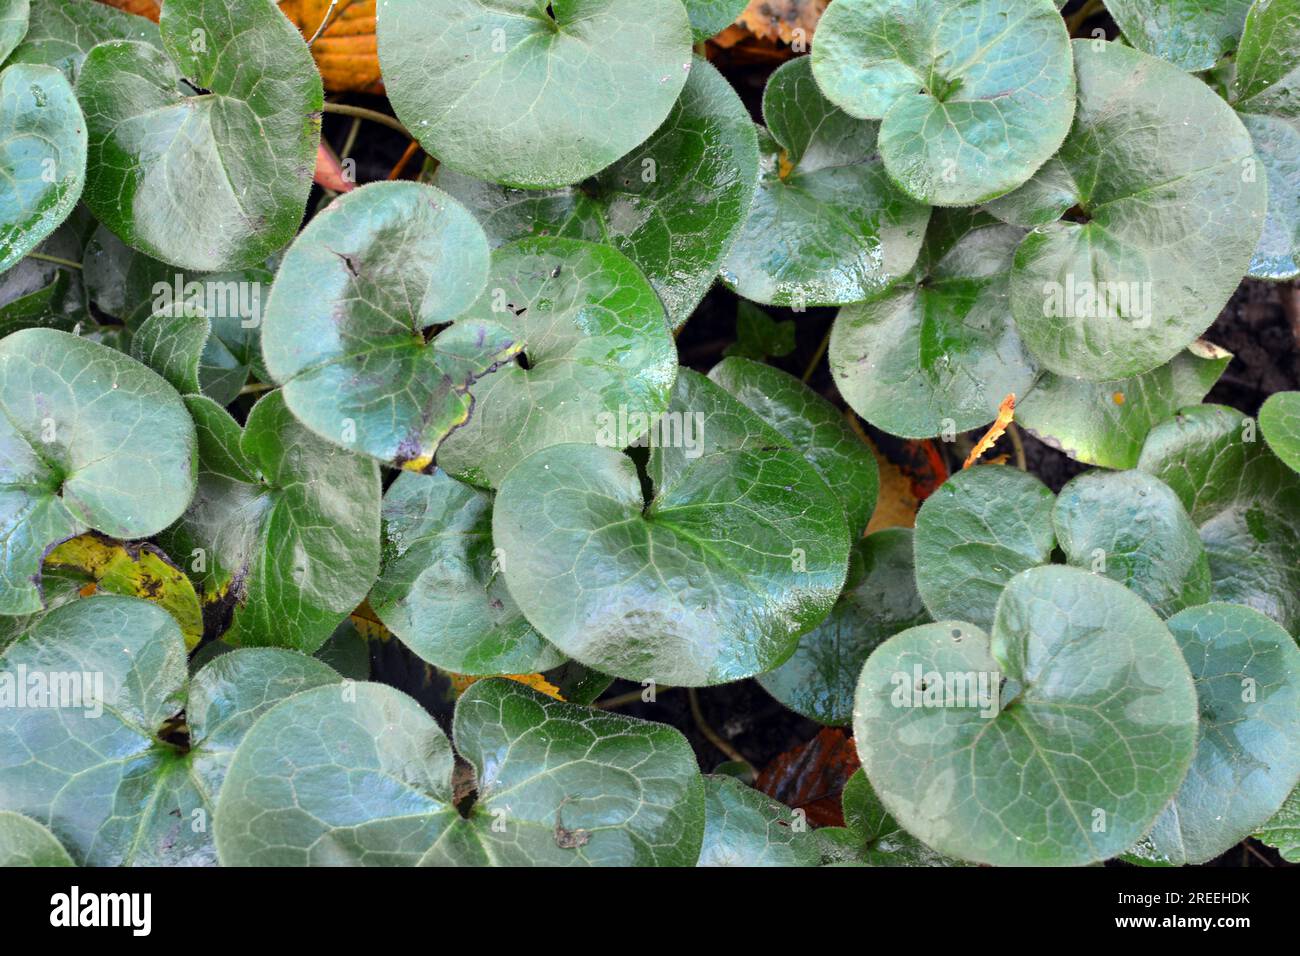 Asarum europaeum grows in the forest in the wild Stock Photo